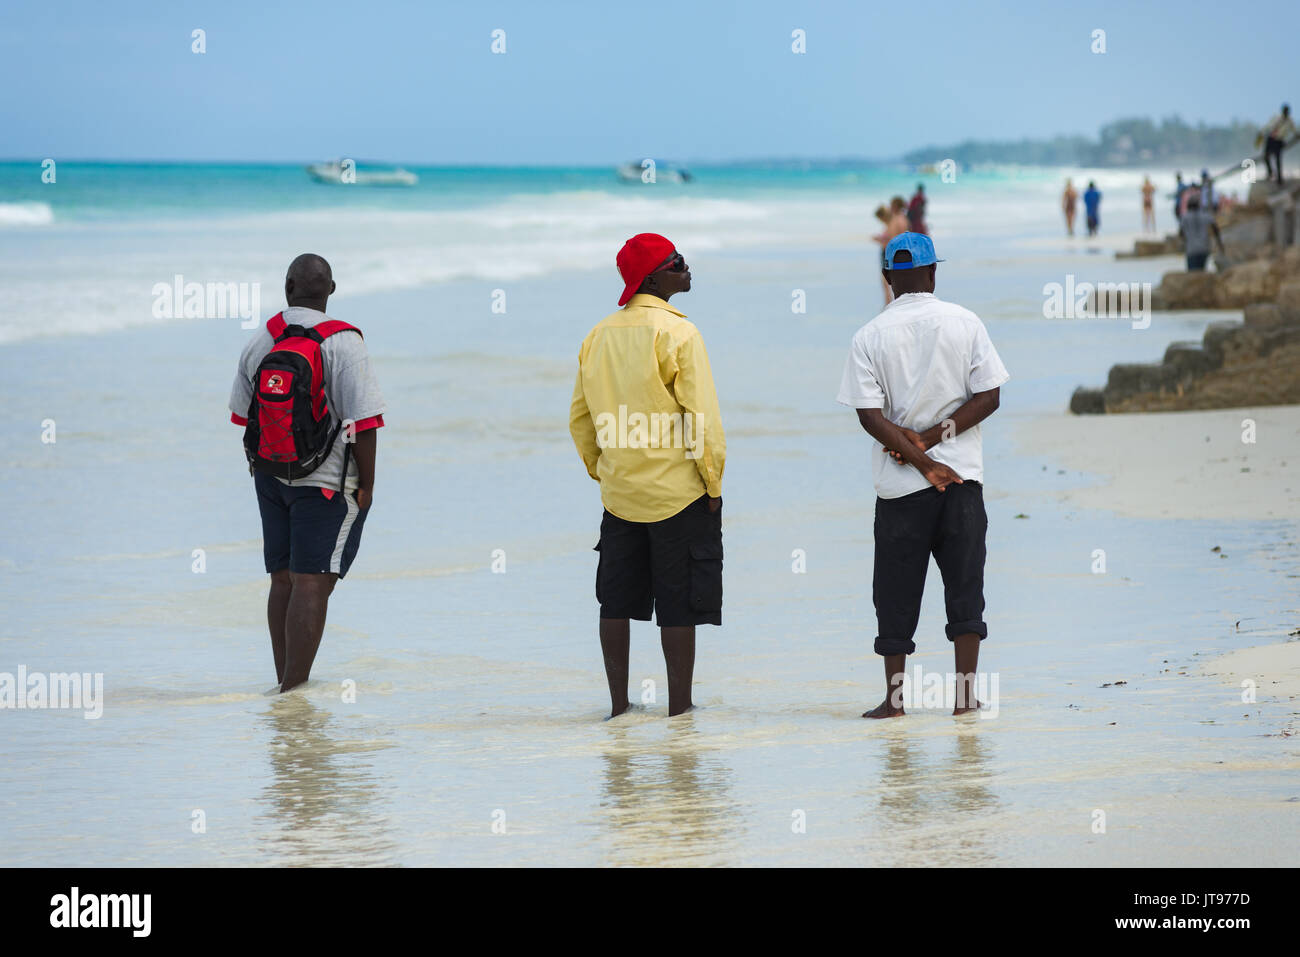 Local sellers wait on the beach by nearby resort for tourists, Diani, Kenya Stock Photo